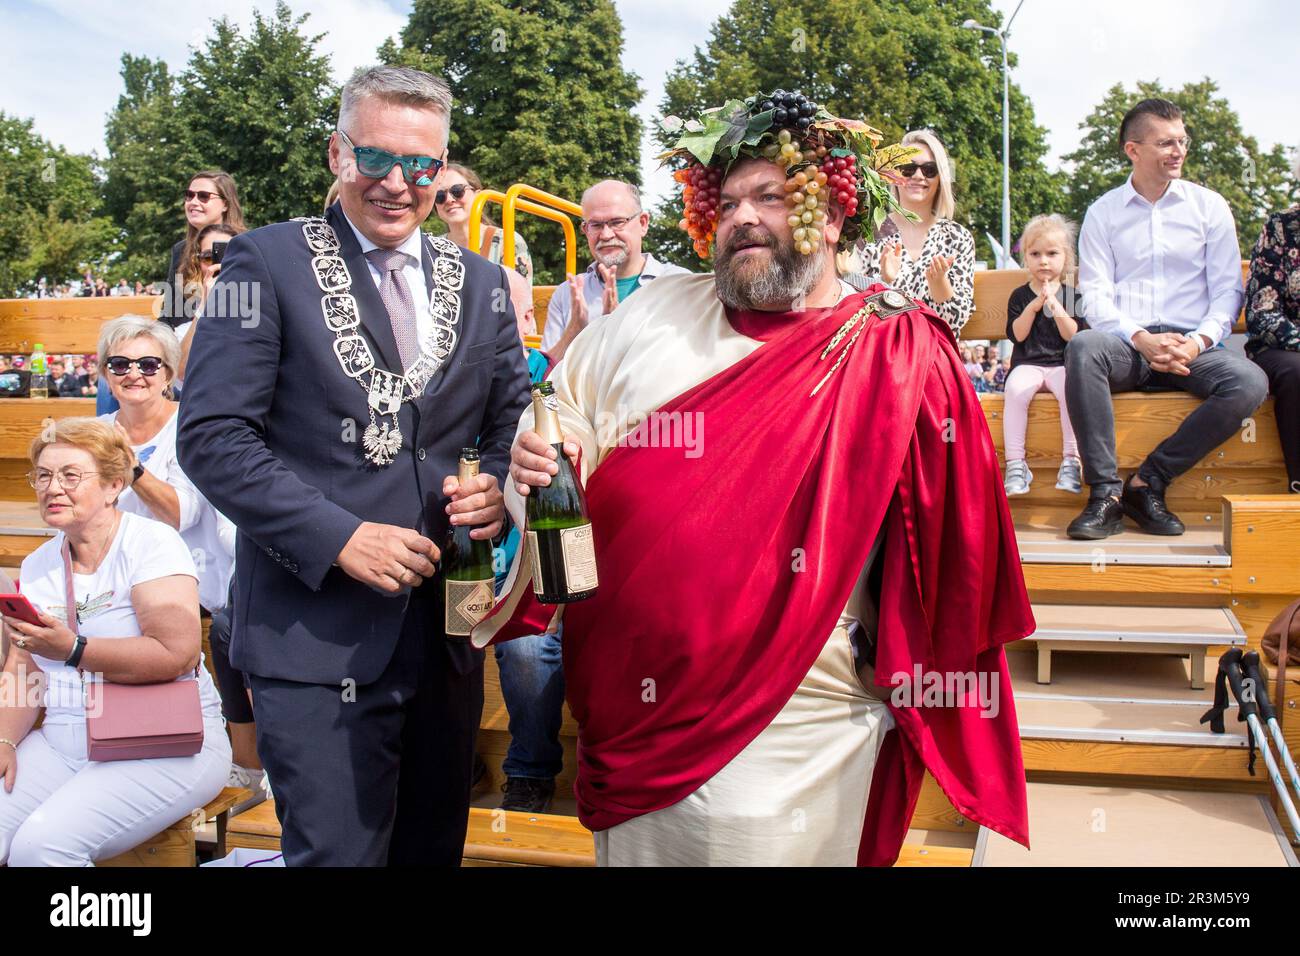 Mayor of Zielona Gora; Janusz Kubicki and a man in a Bacchus costume seen during the traditional Winobranie Wine Festival Parade. The local winemakers and artists, schools, as well as the residents of Zielona Gora take part in it, strolling down the main streets of the city in colourful disguises. Zielona Gora Wine Fest is a wine festival held in the Polish town of Zielona Gora. Winobranie is the biggest wine festival in Poland. The first festival took place in October 1852.During the Winobranie Wine Festival week, Bacchus, the god of wine and a symbol of Zielona Gora, gets the keys to the cit Stock Photo